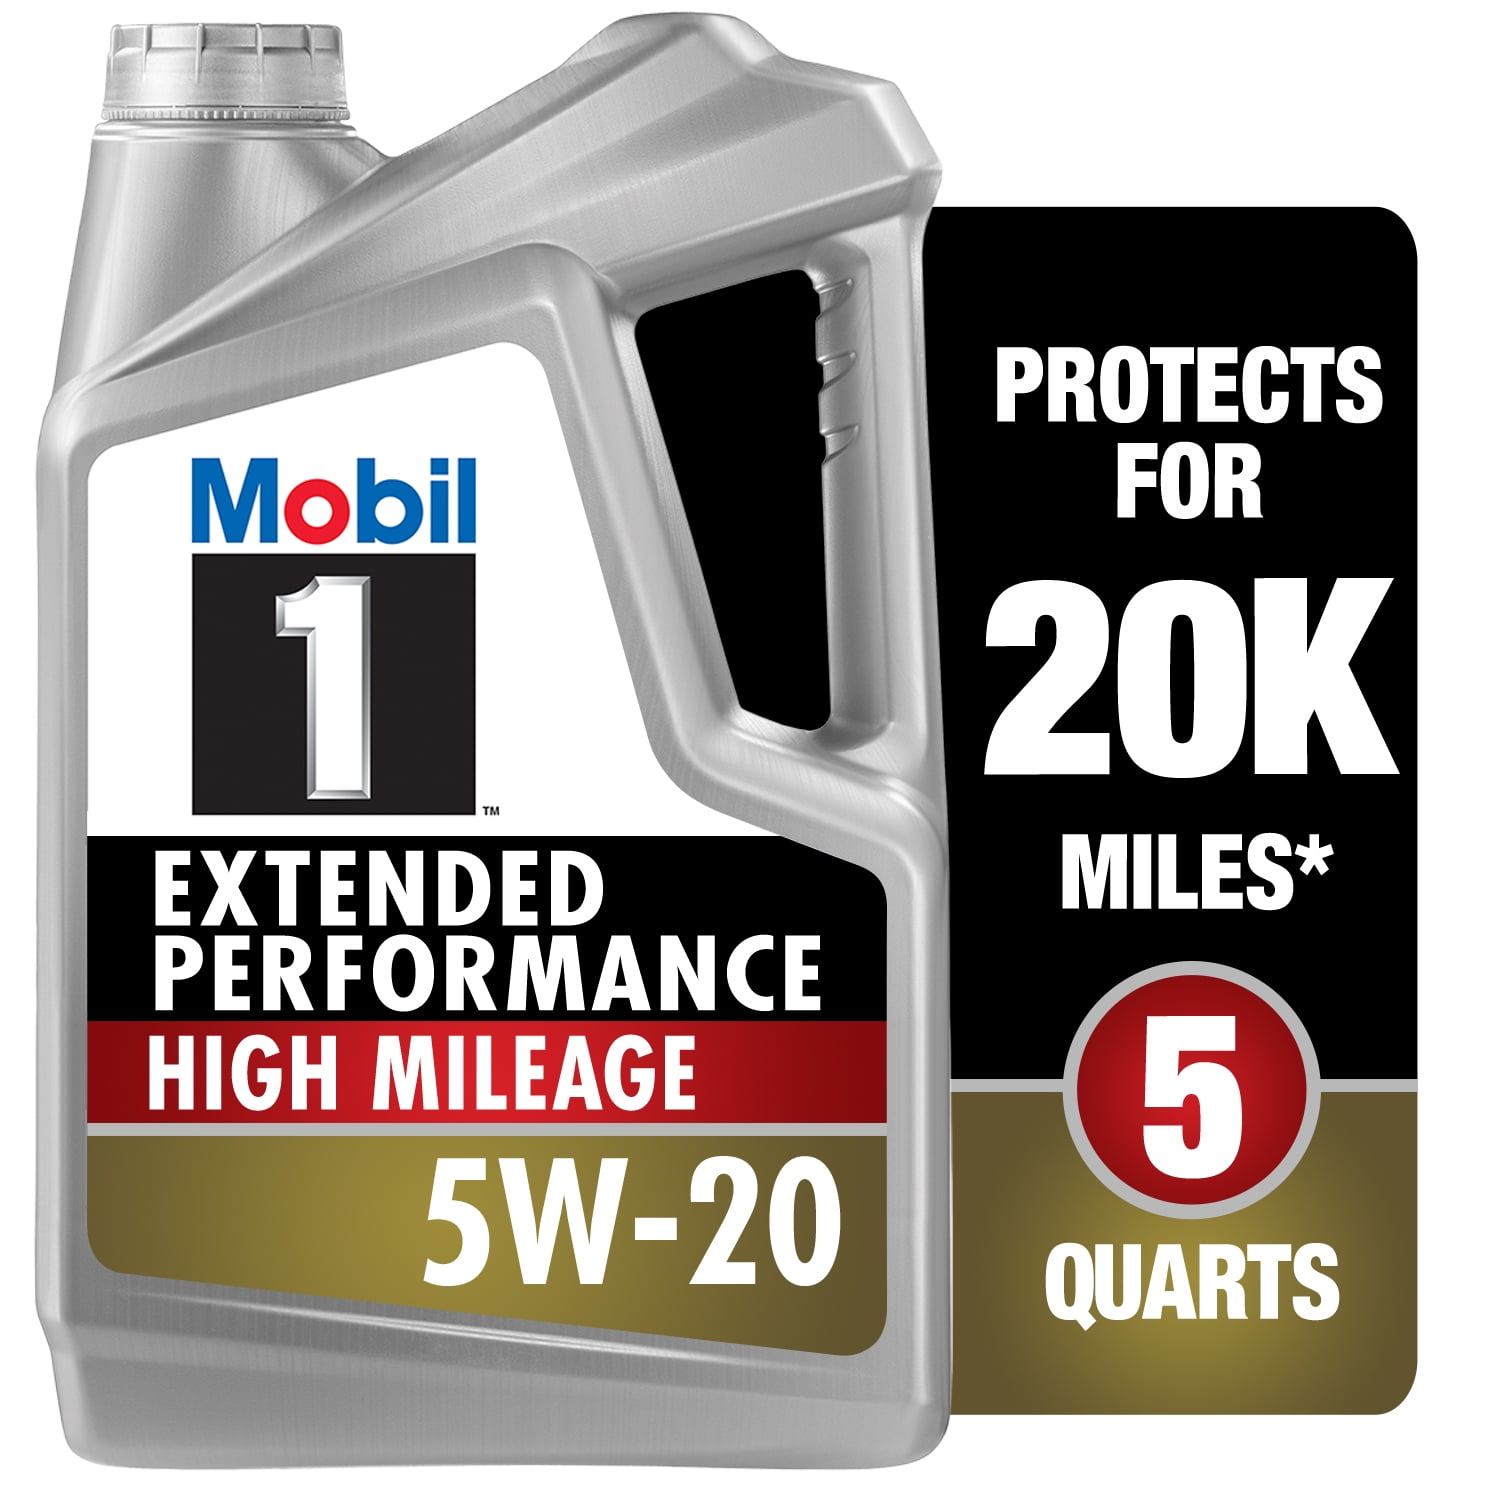 Mobil 1 Extended Performance High Mileage Full Synthetic Motor Oil 5W-20, 5 qt